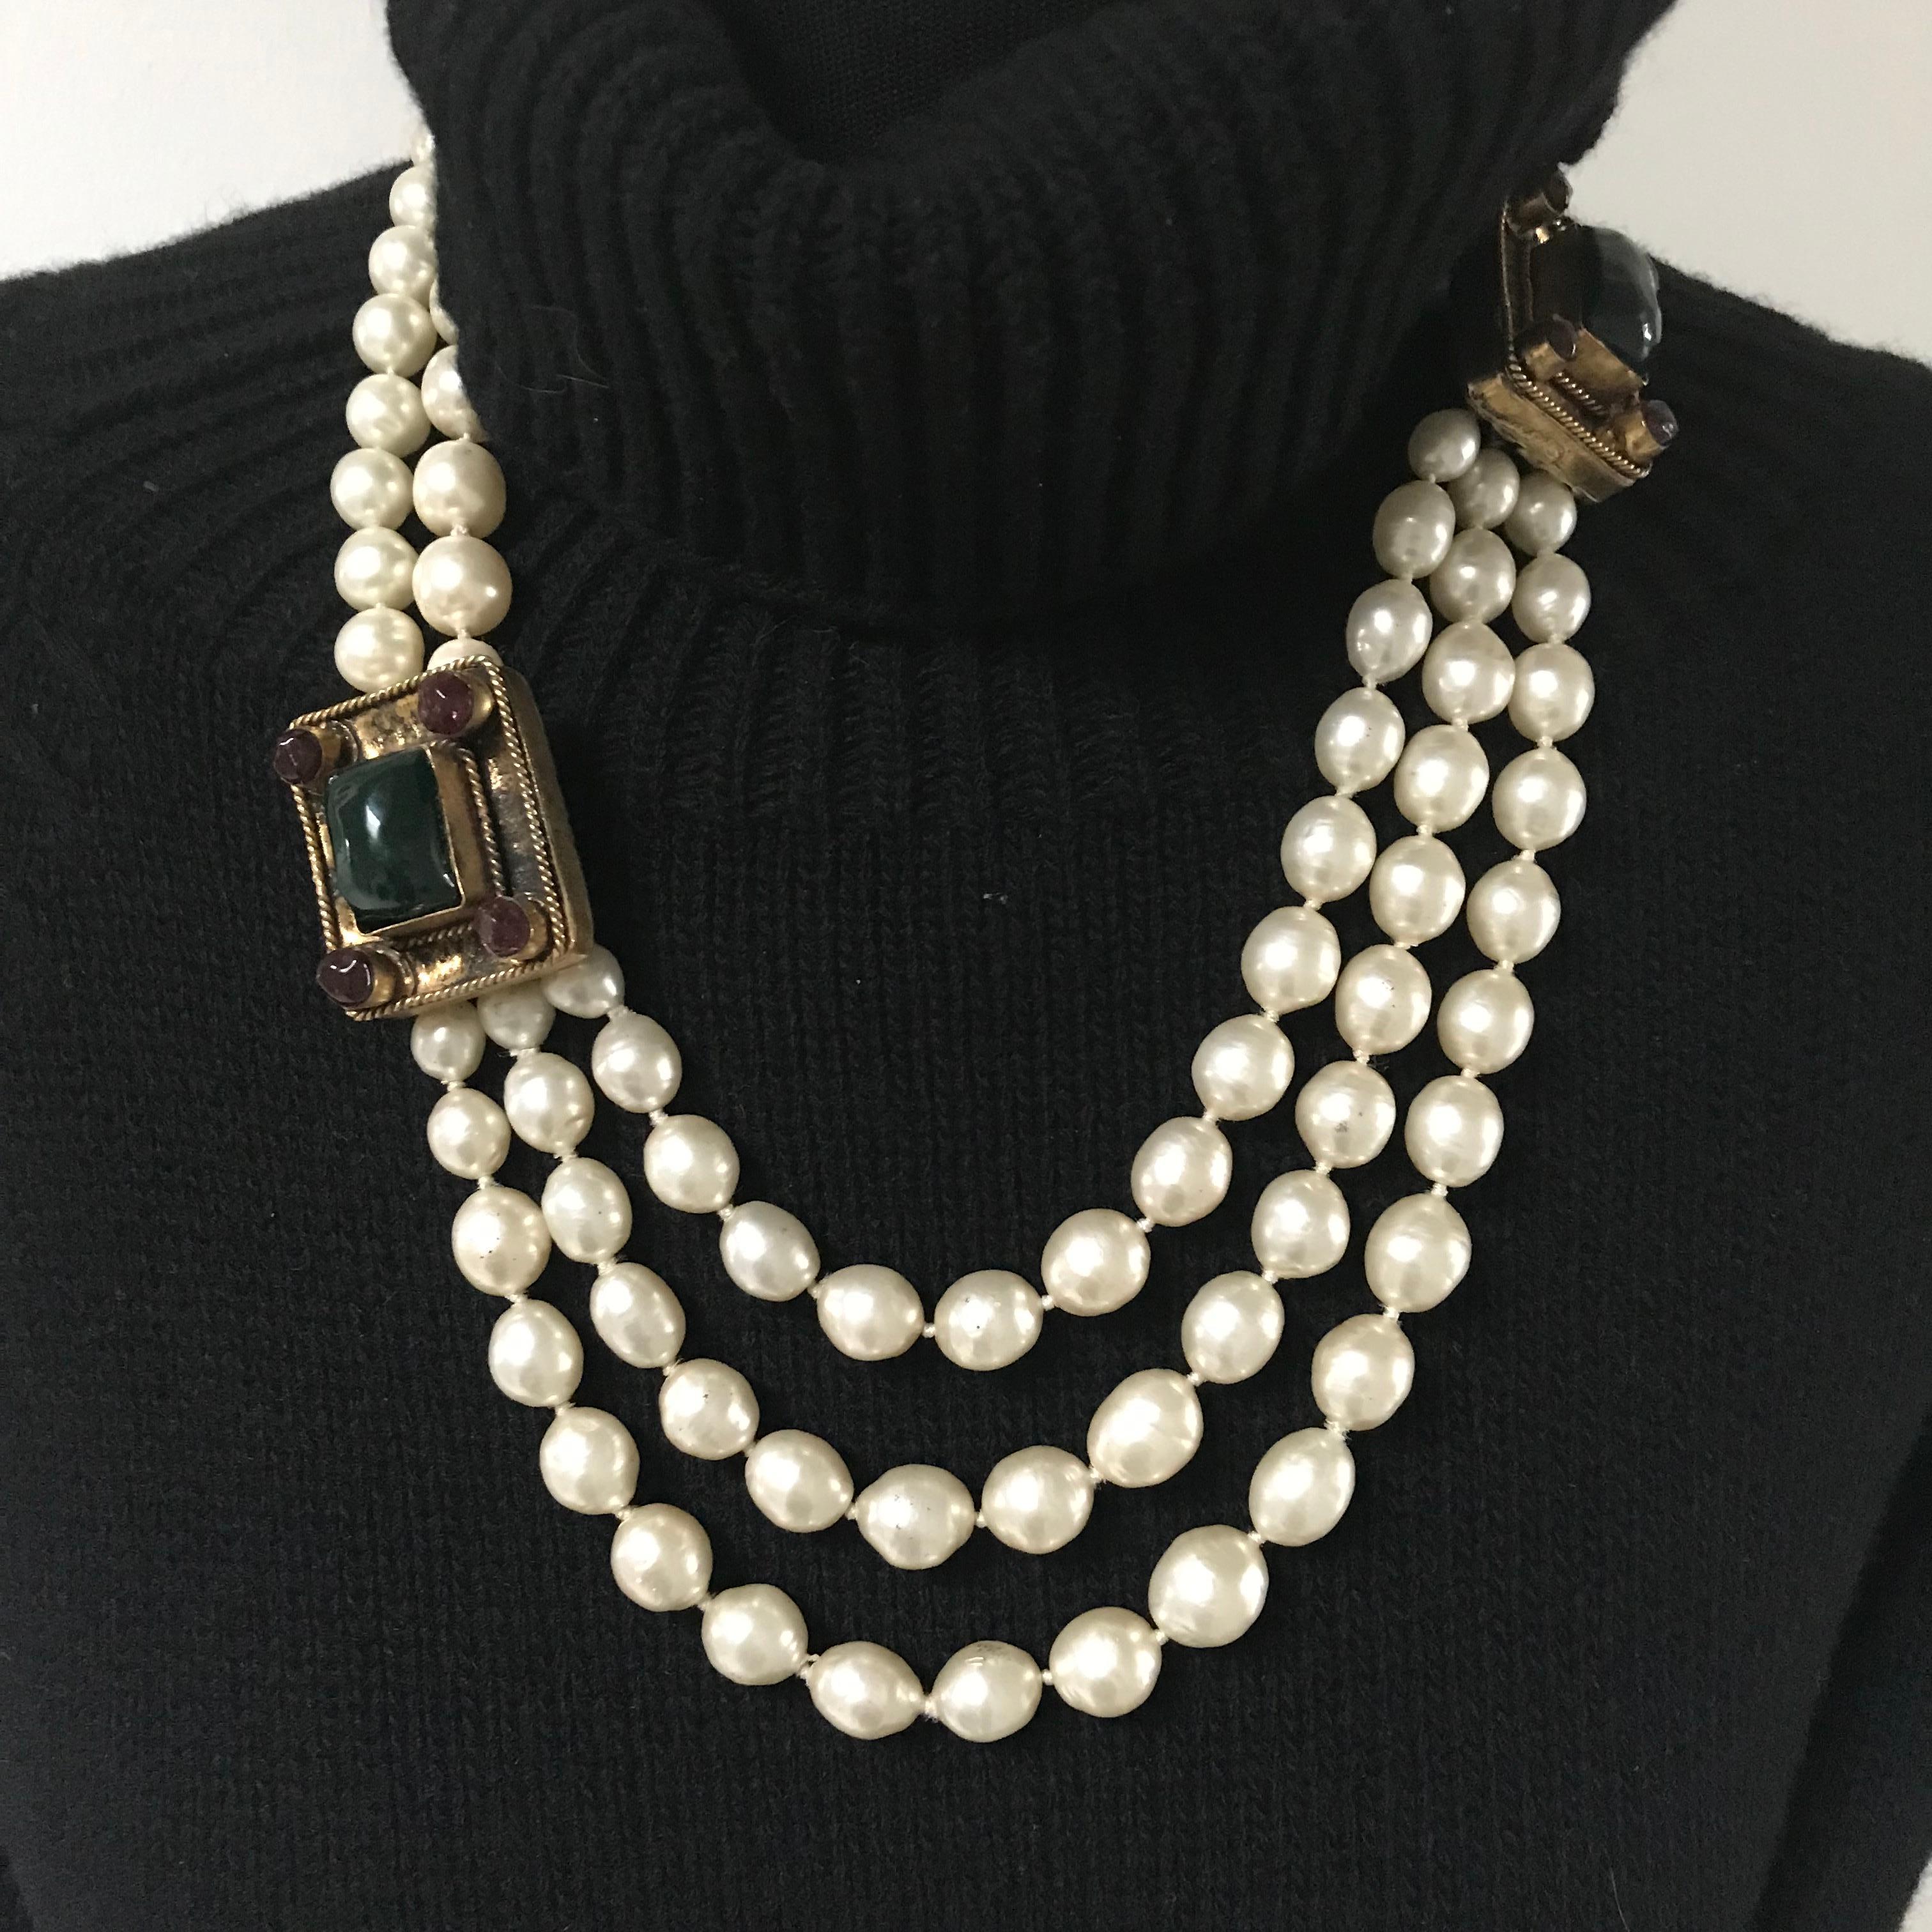 Vintage Chanel pearl necklace by R. Goossens and House of Gripoix signed 1984. 2